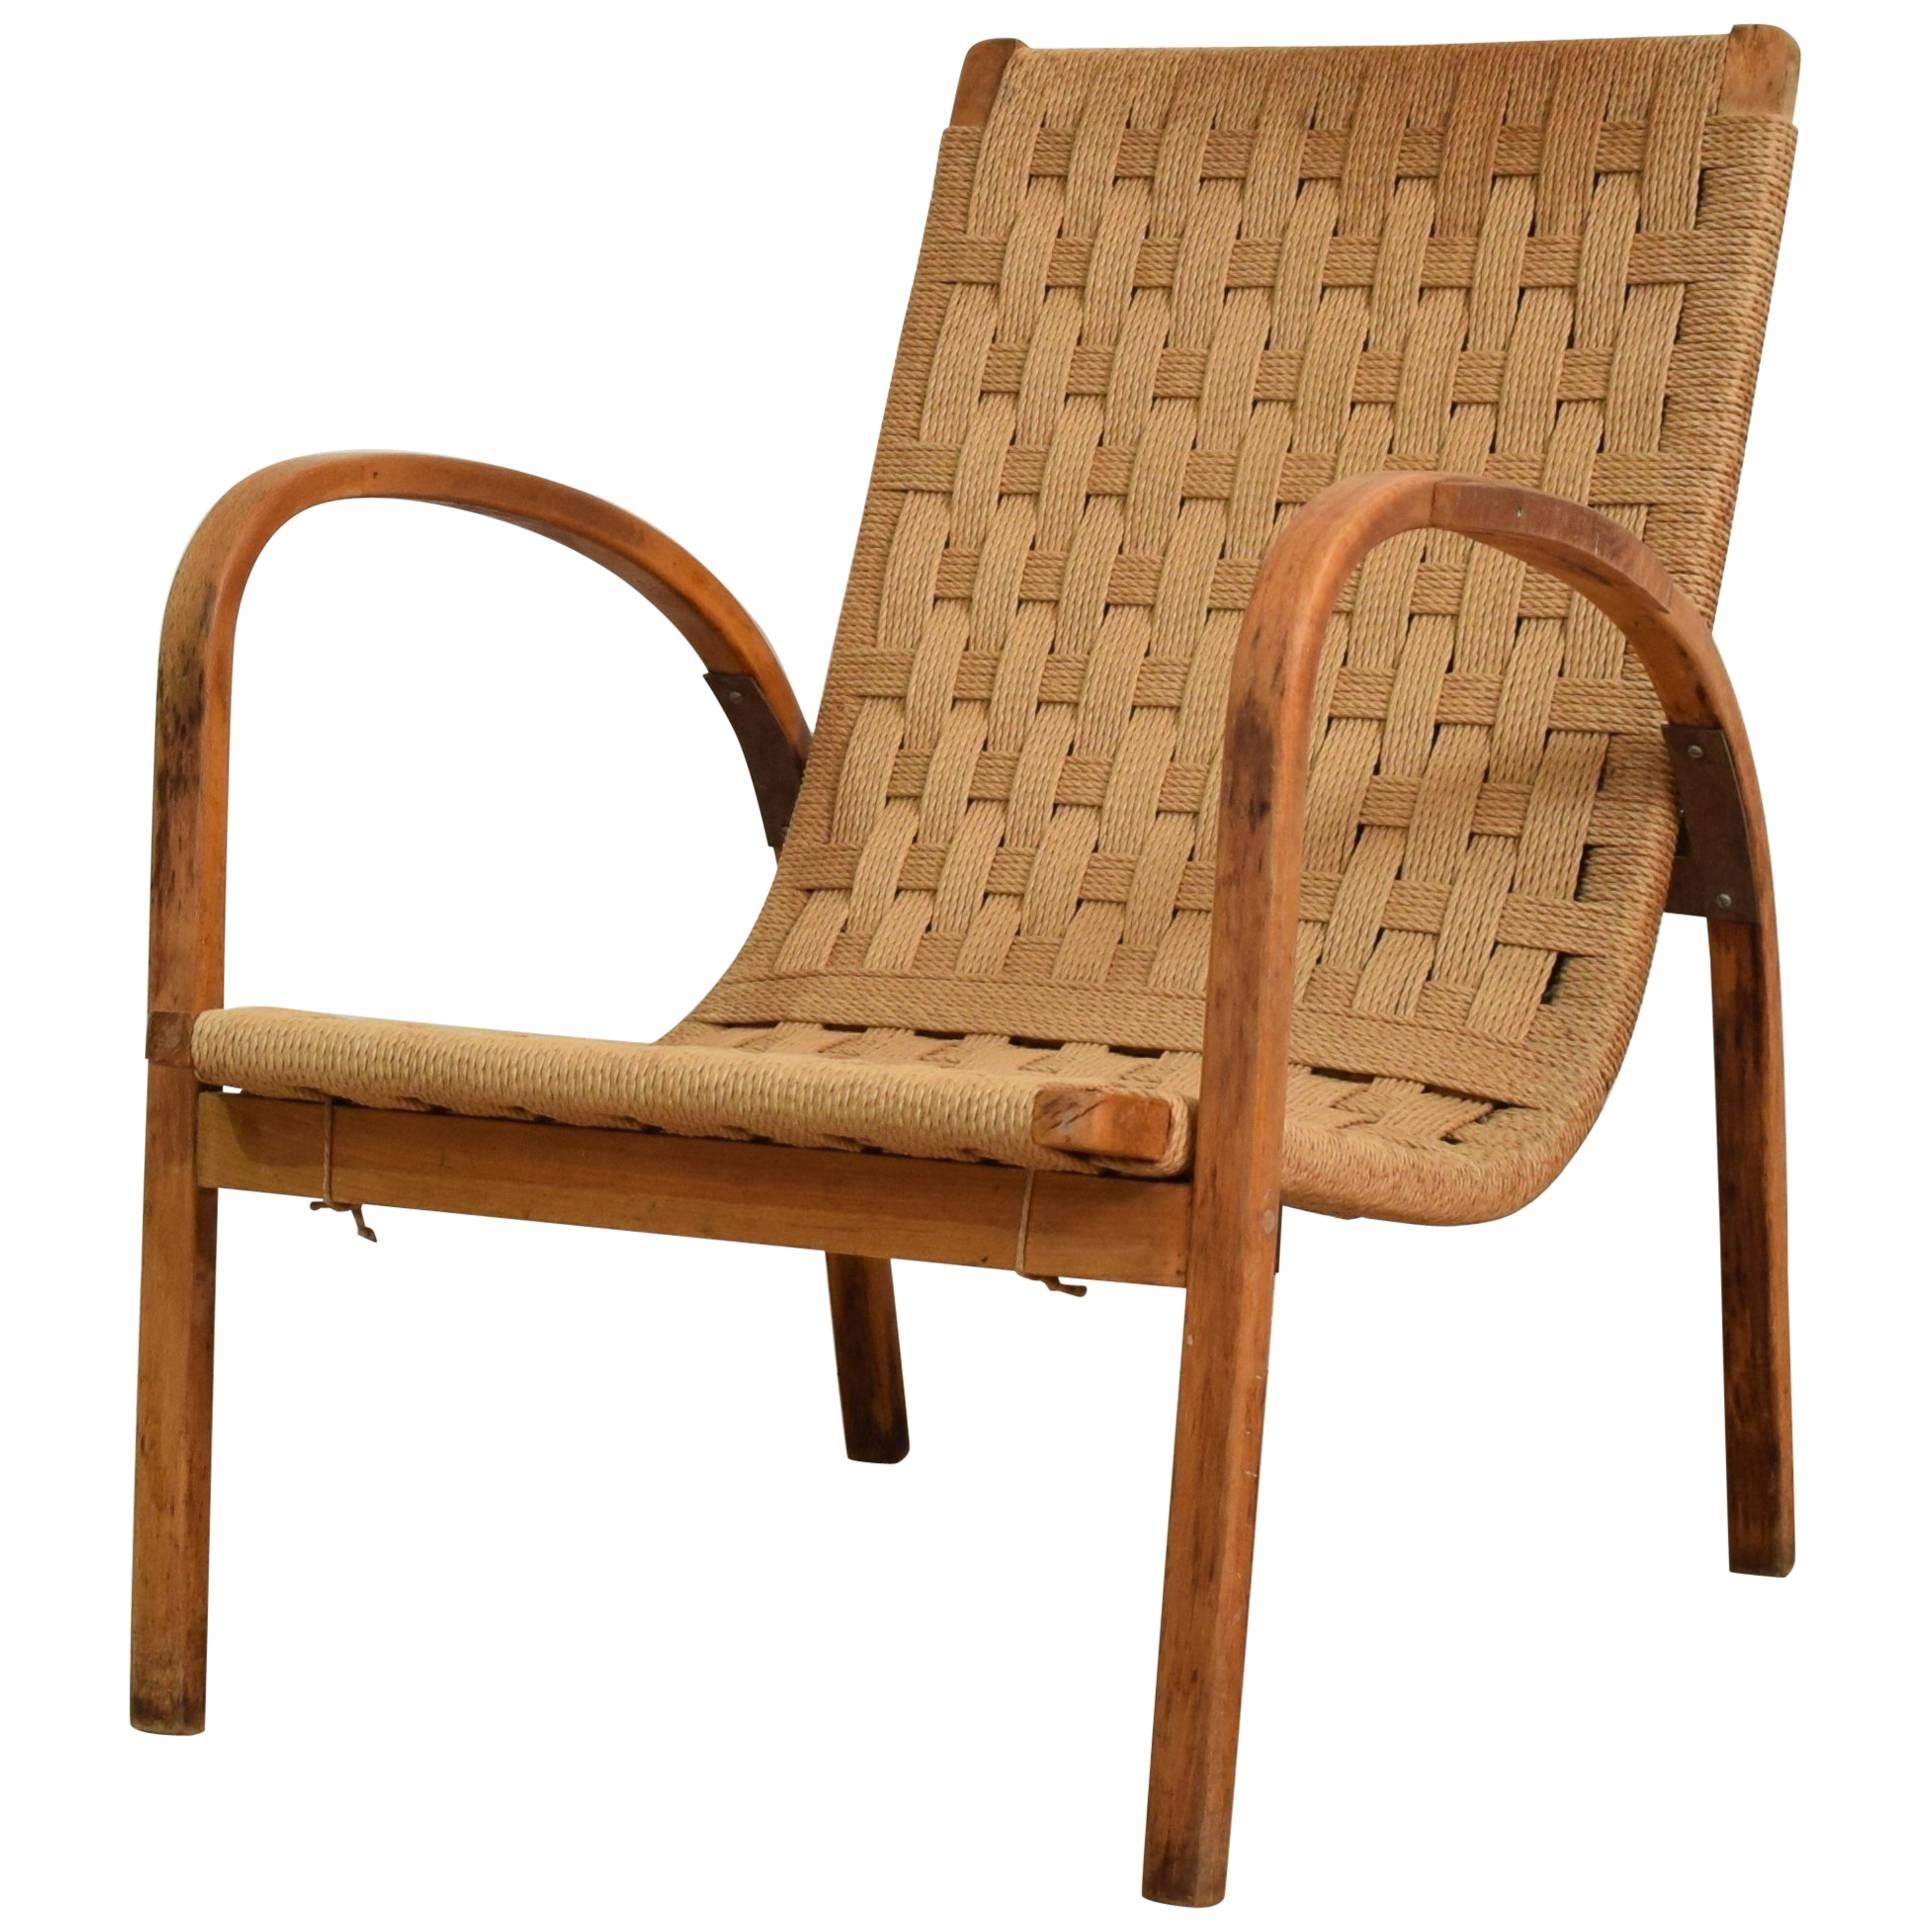 1920s Italian Armchair in Beech and Cane